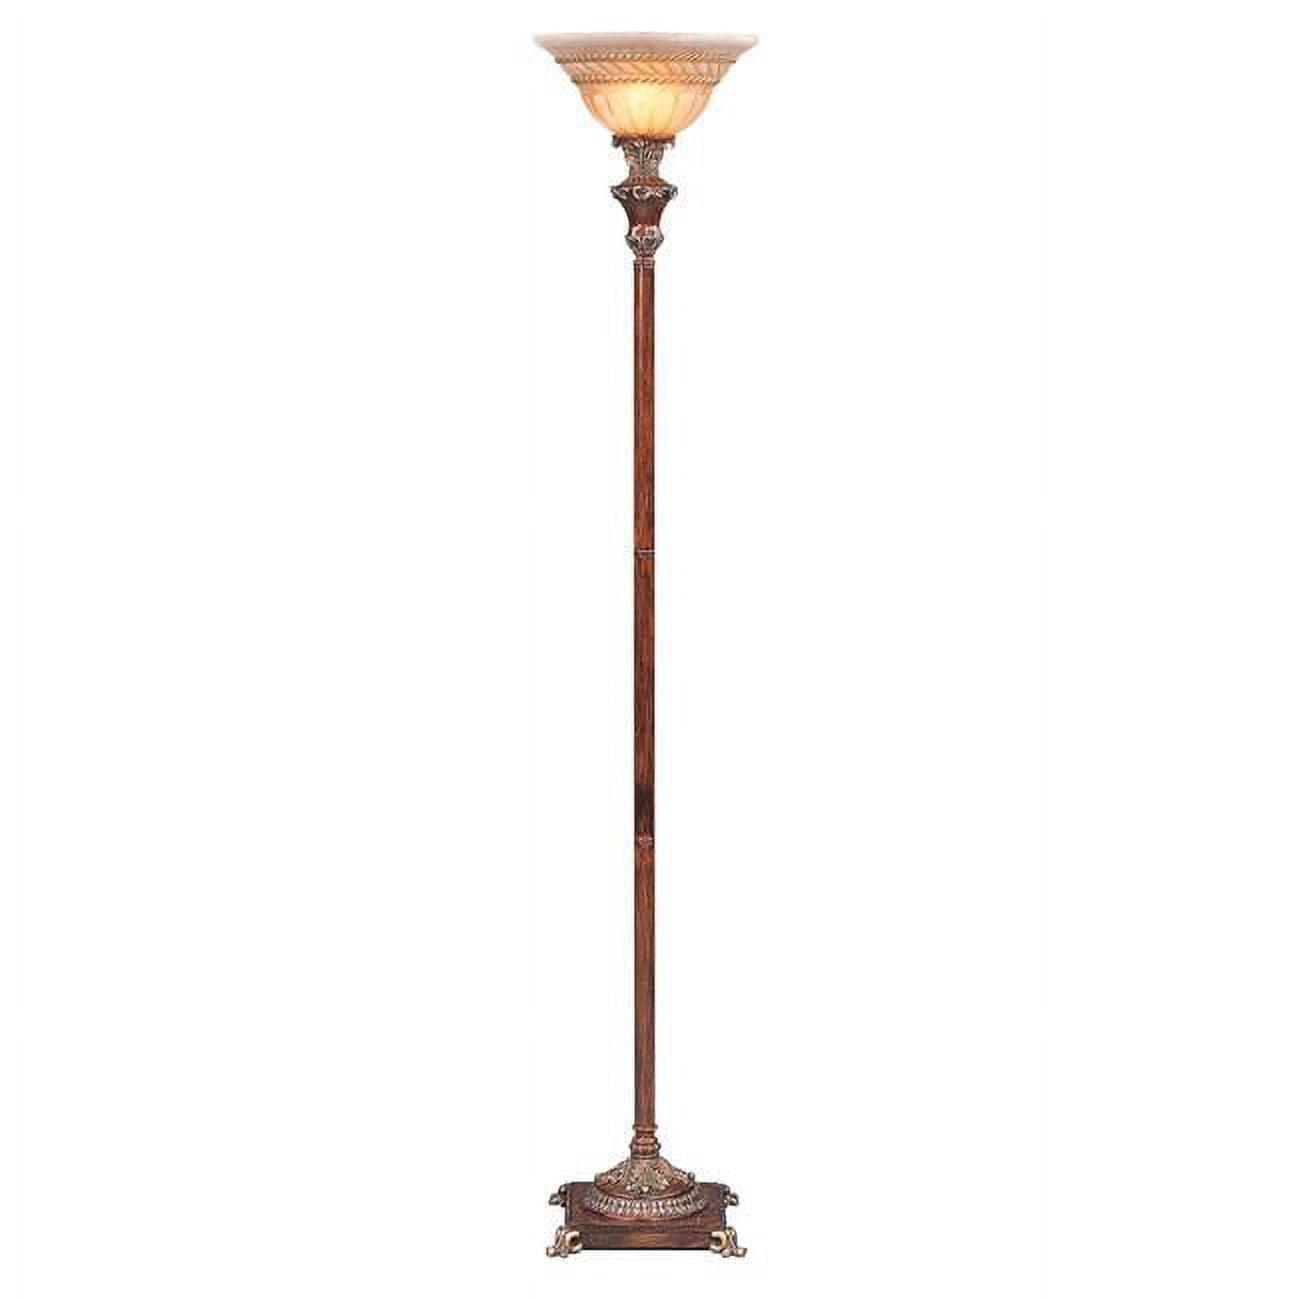 Elegant Faux Wood Torchiere Floor Lamp with Stained Glass Shade